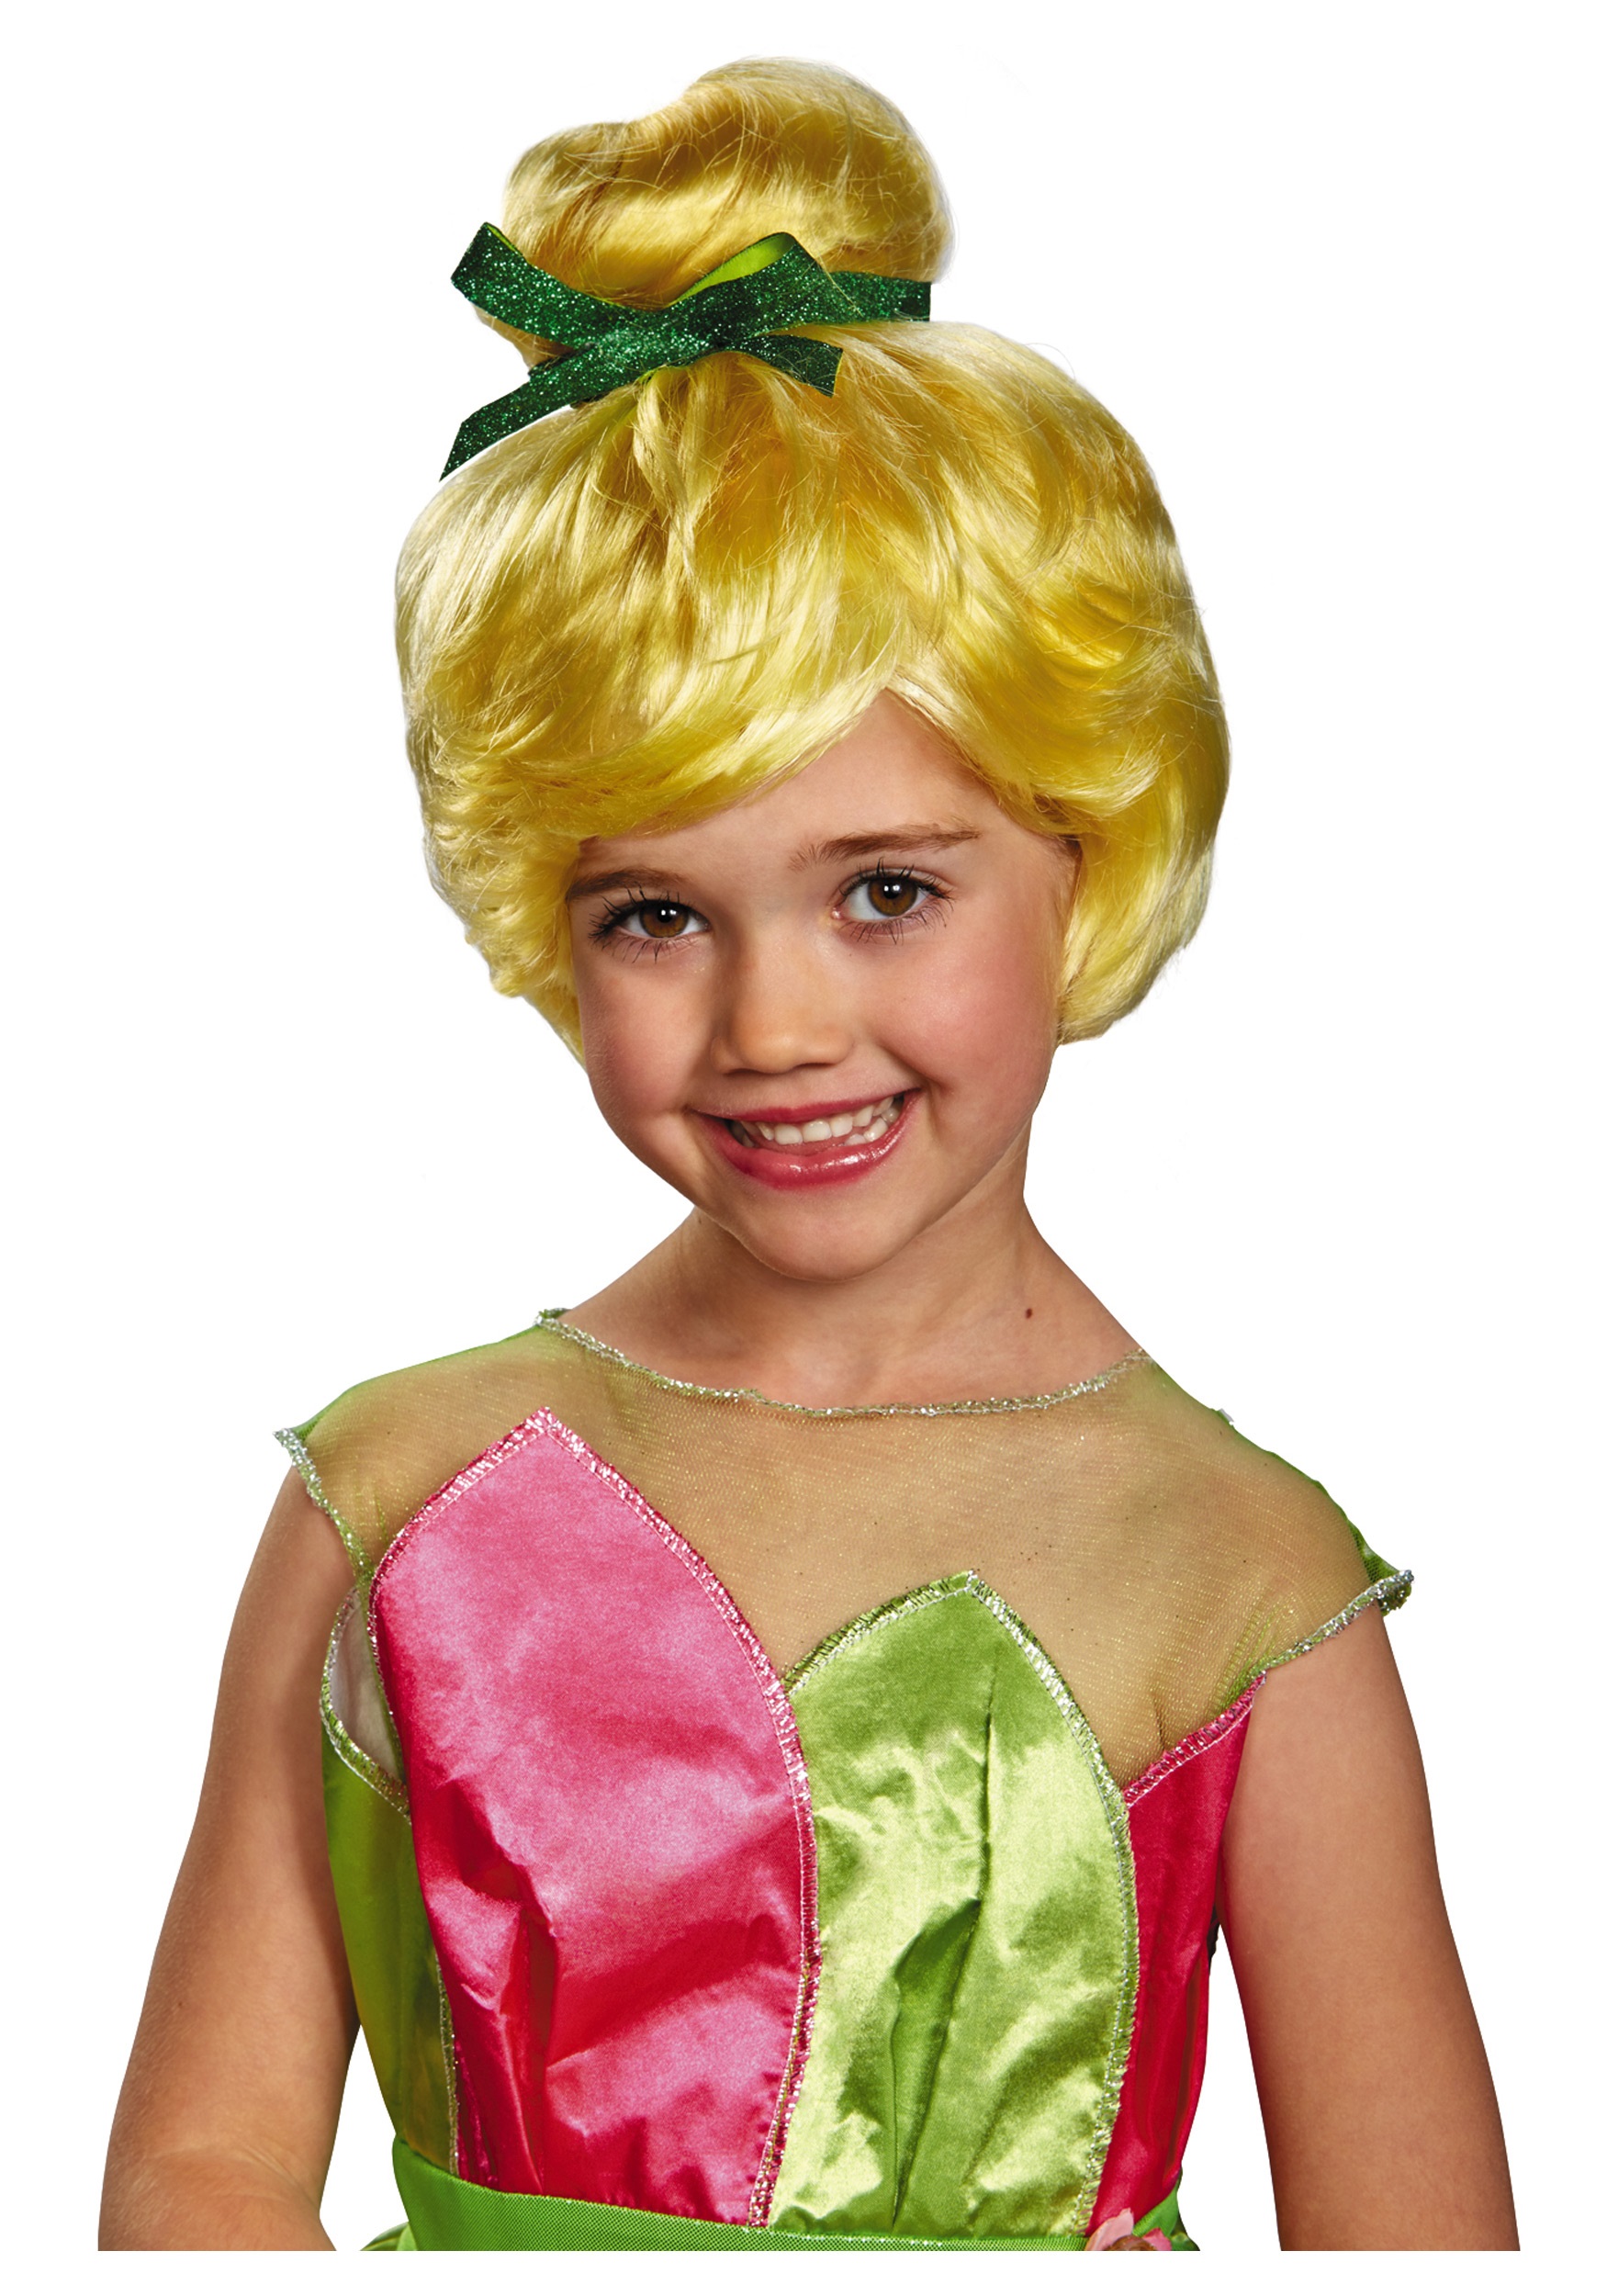 dress up wigs for kids